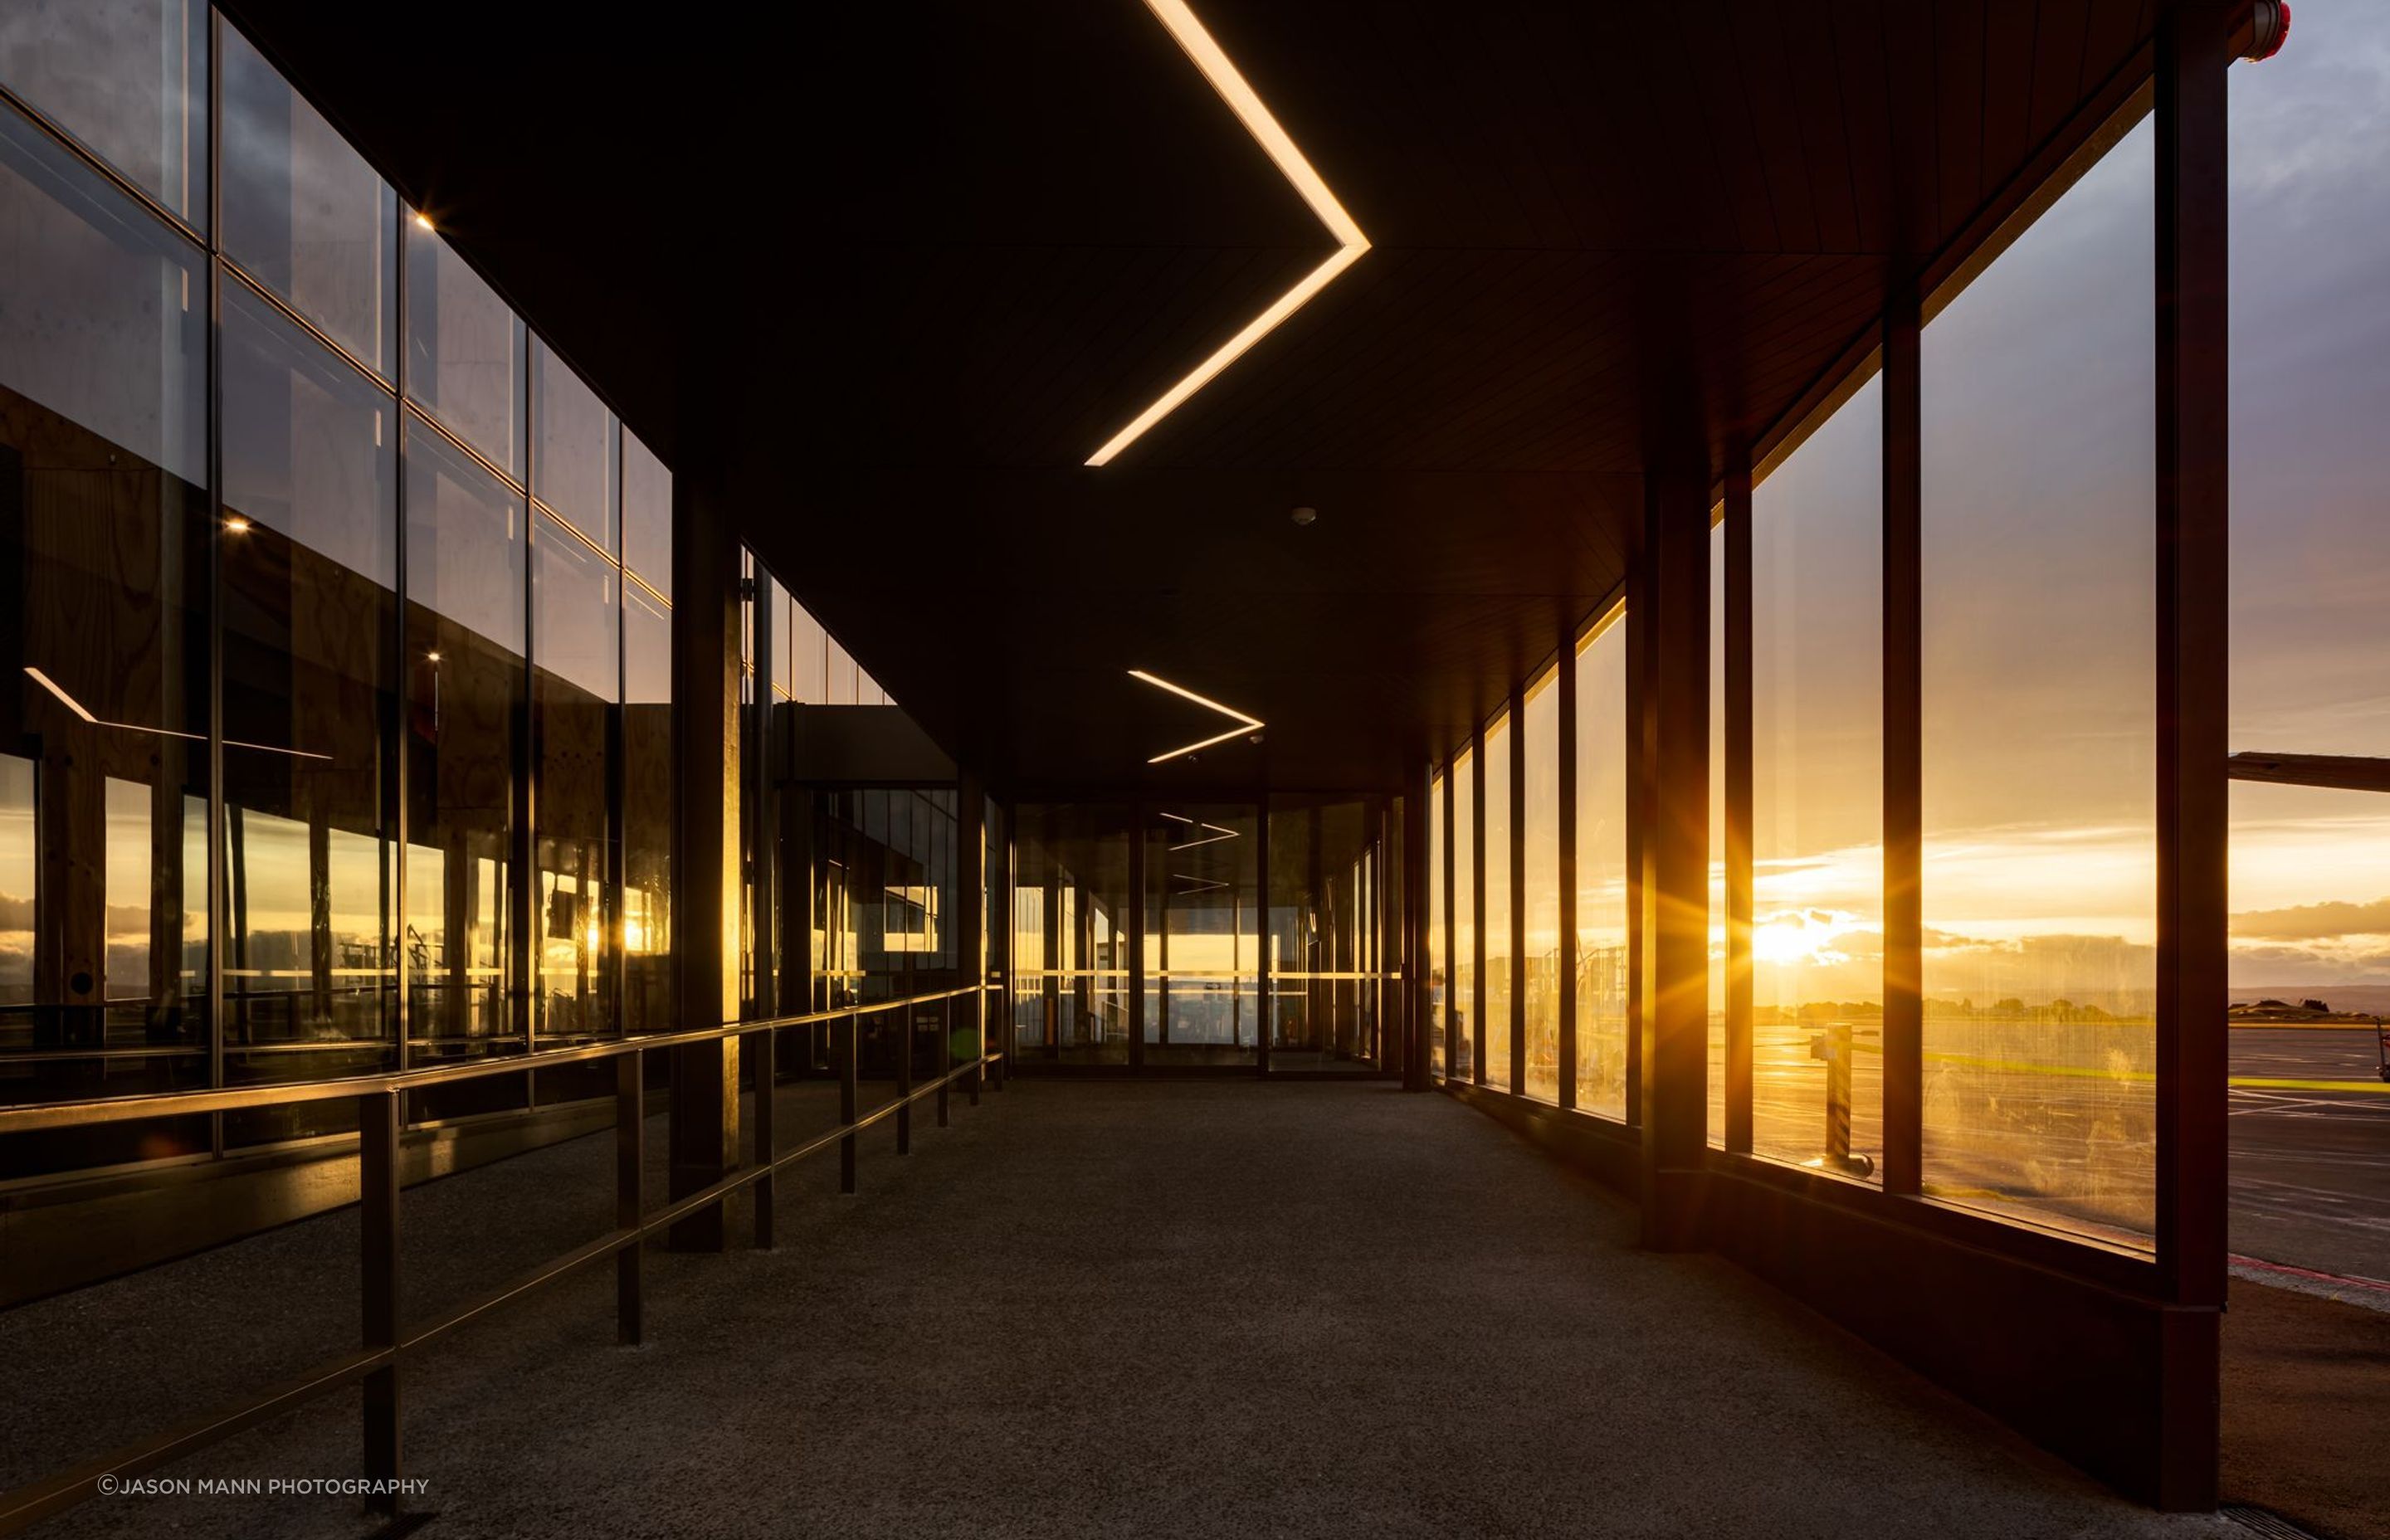 "Nelson Airport Terminal is a beautiful departure and arrival place, giving a lot of people a lot of joy and delight," says Architect Evžen Novak.